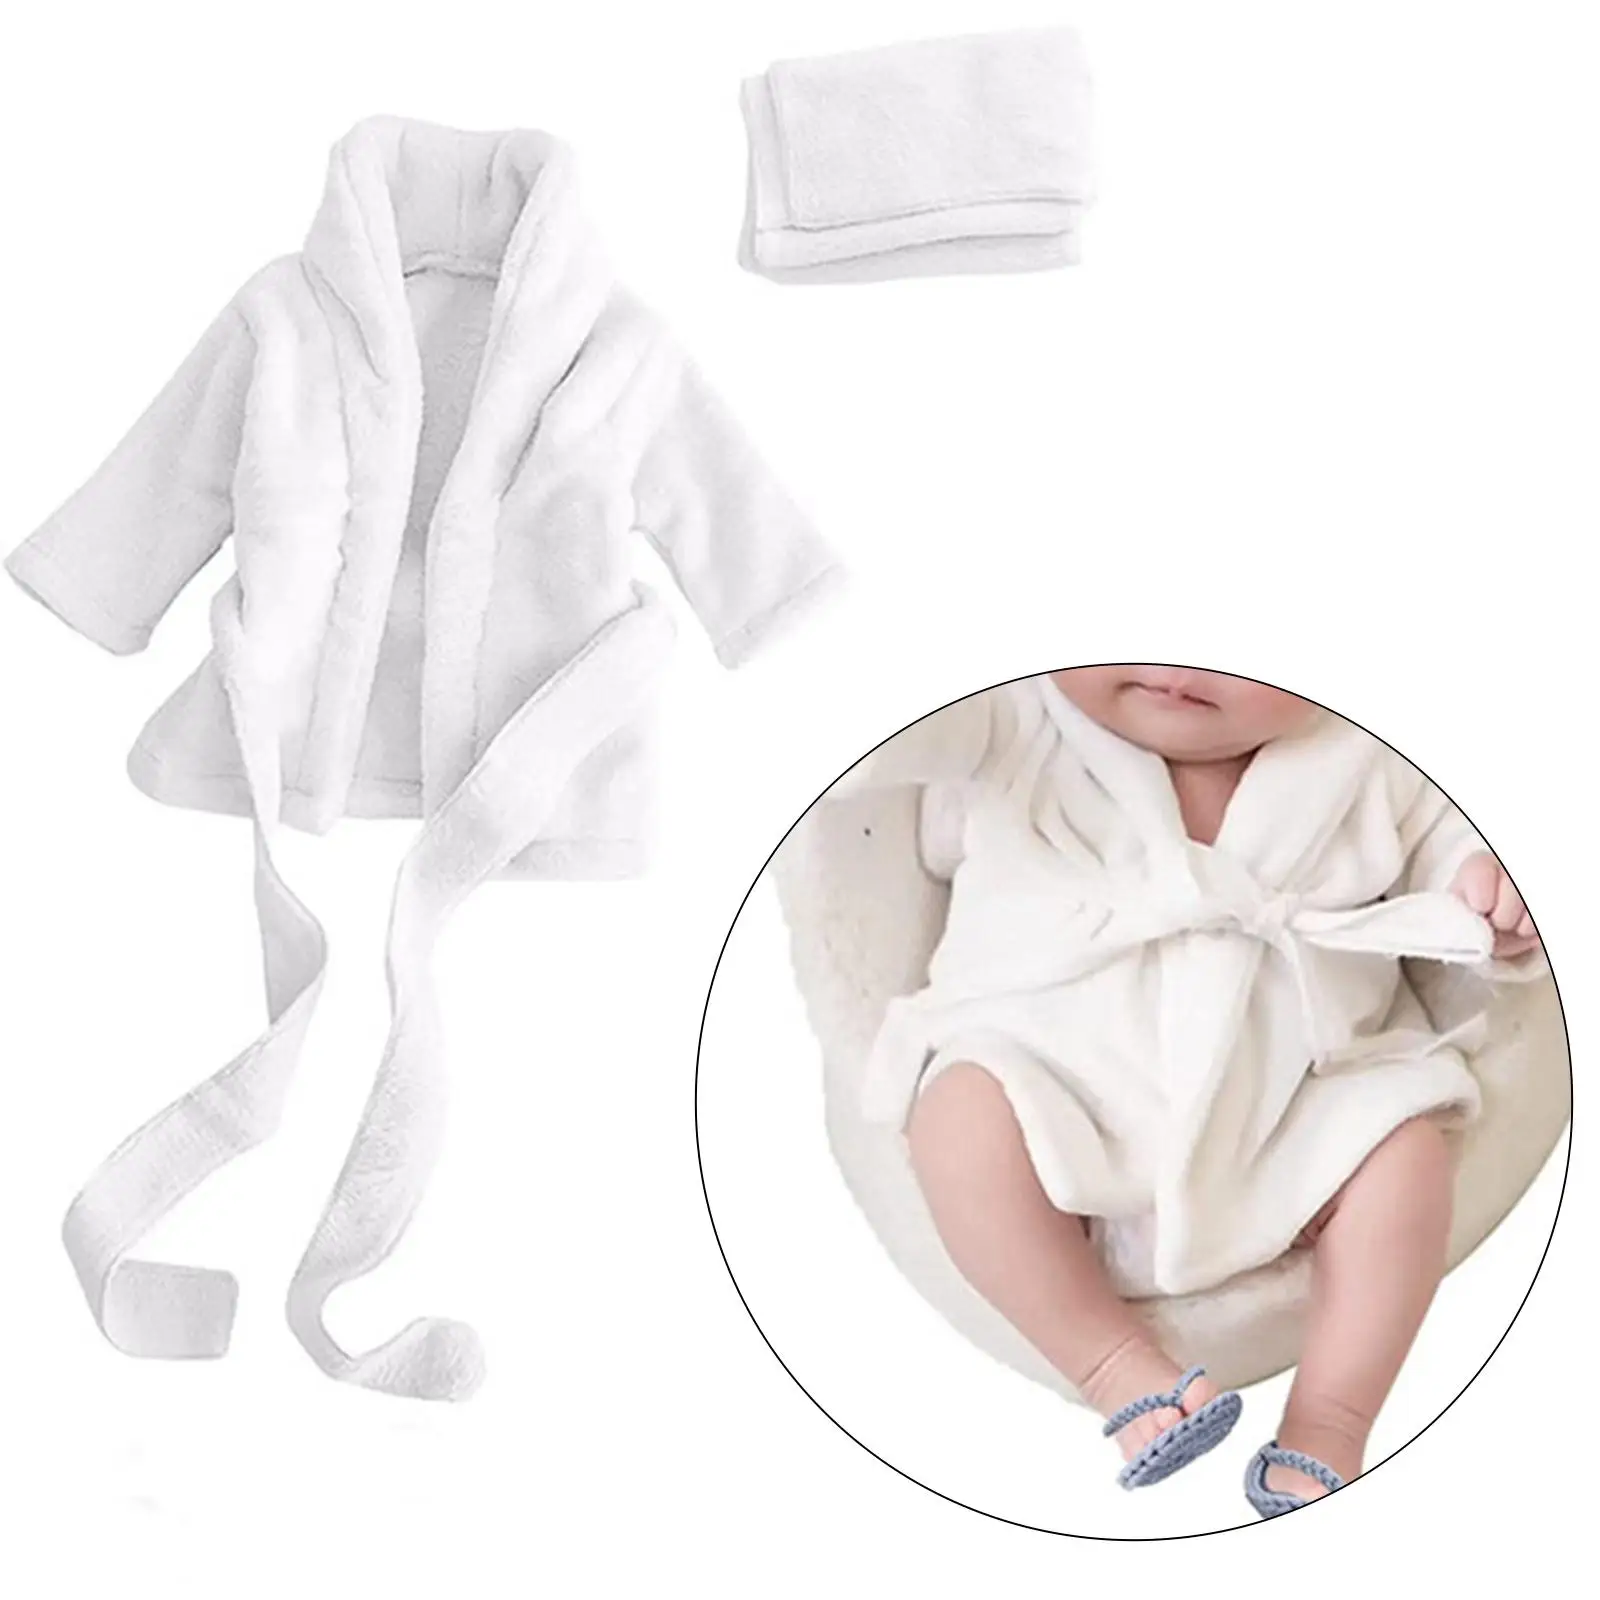 Photo Props Outfit Baby Towel Set Photo Prop